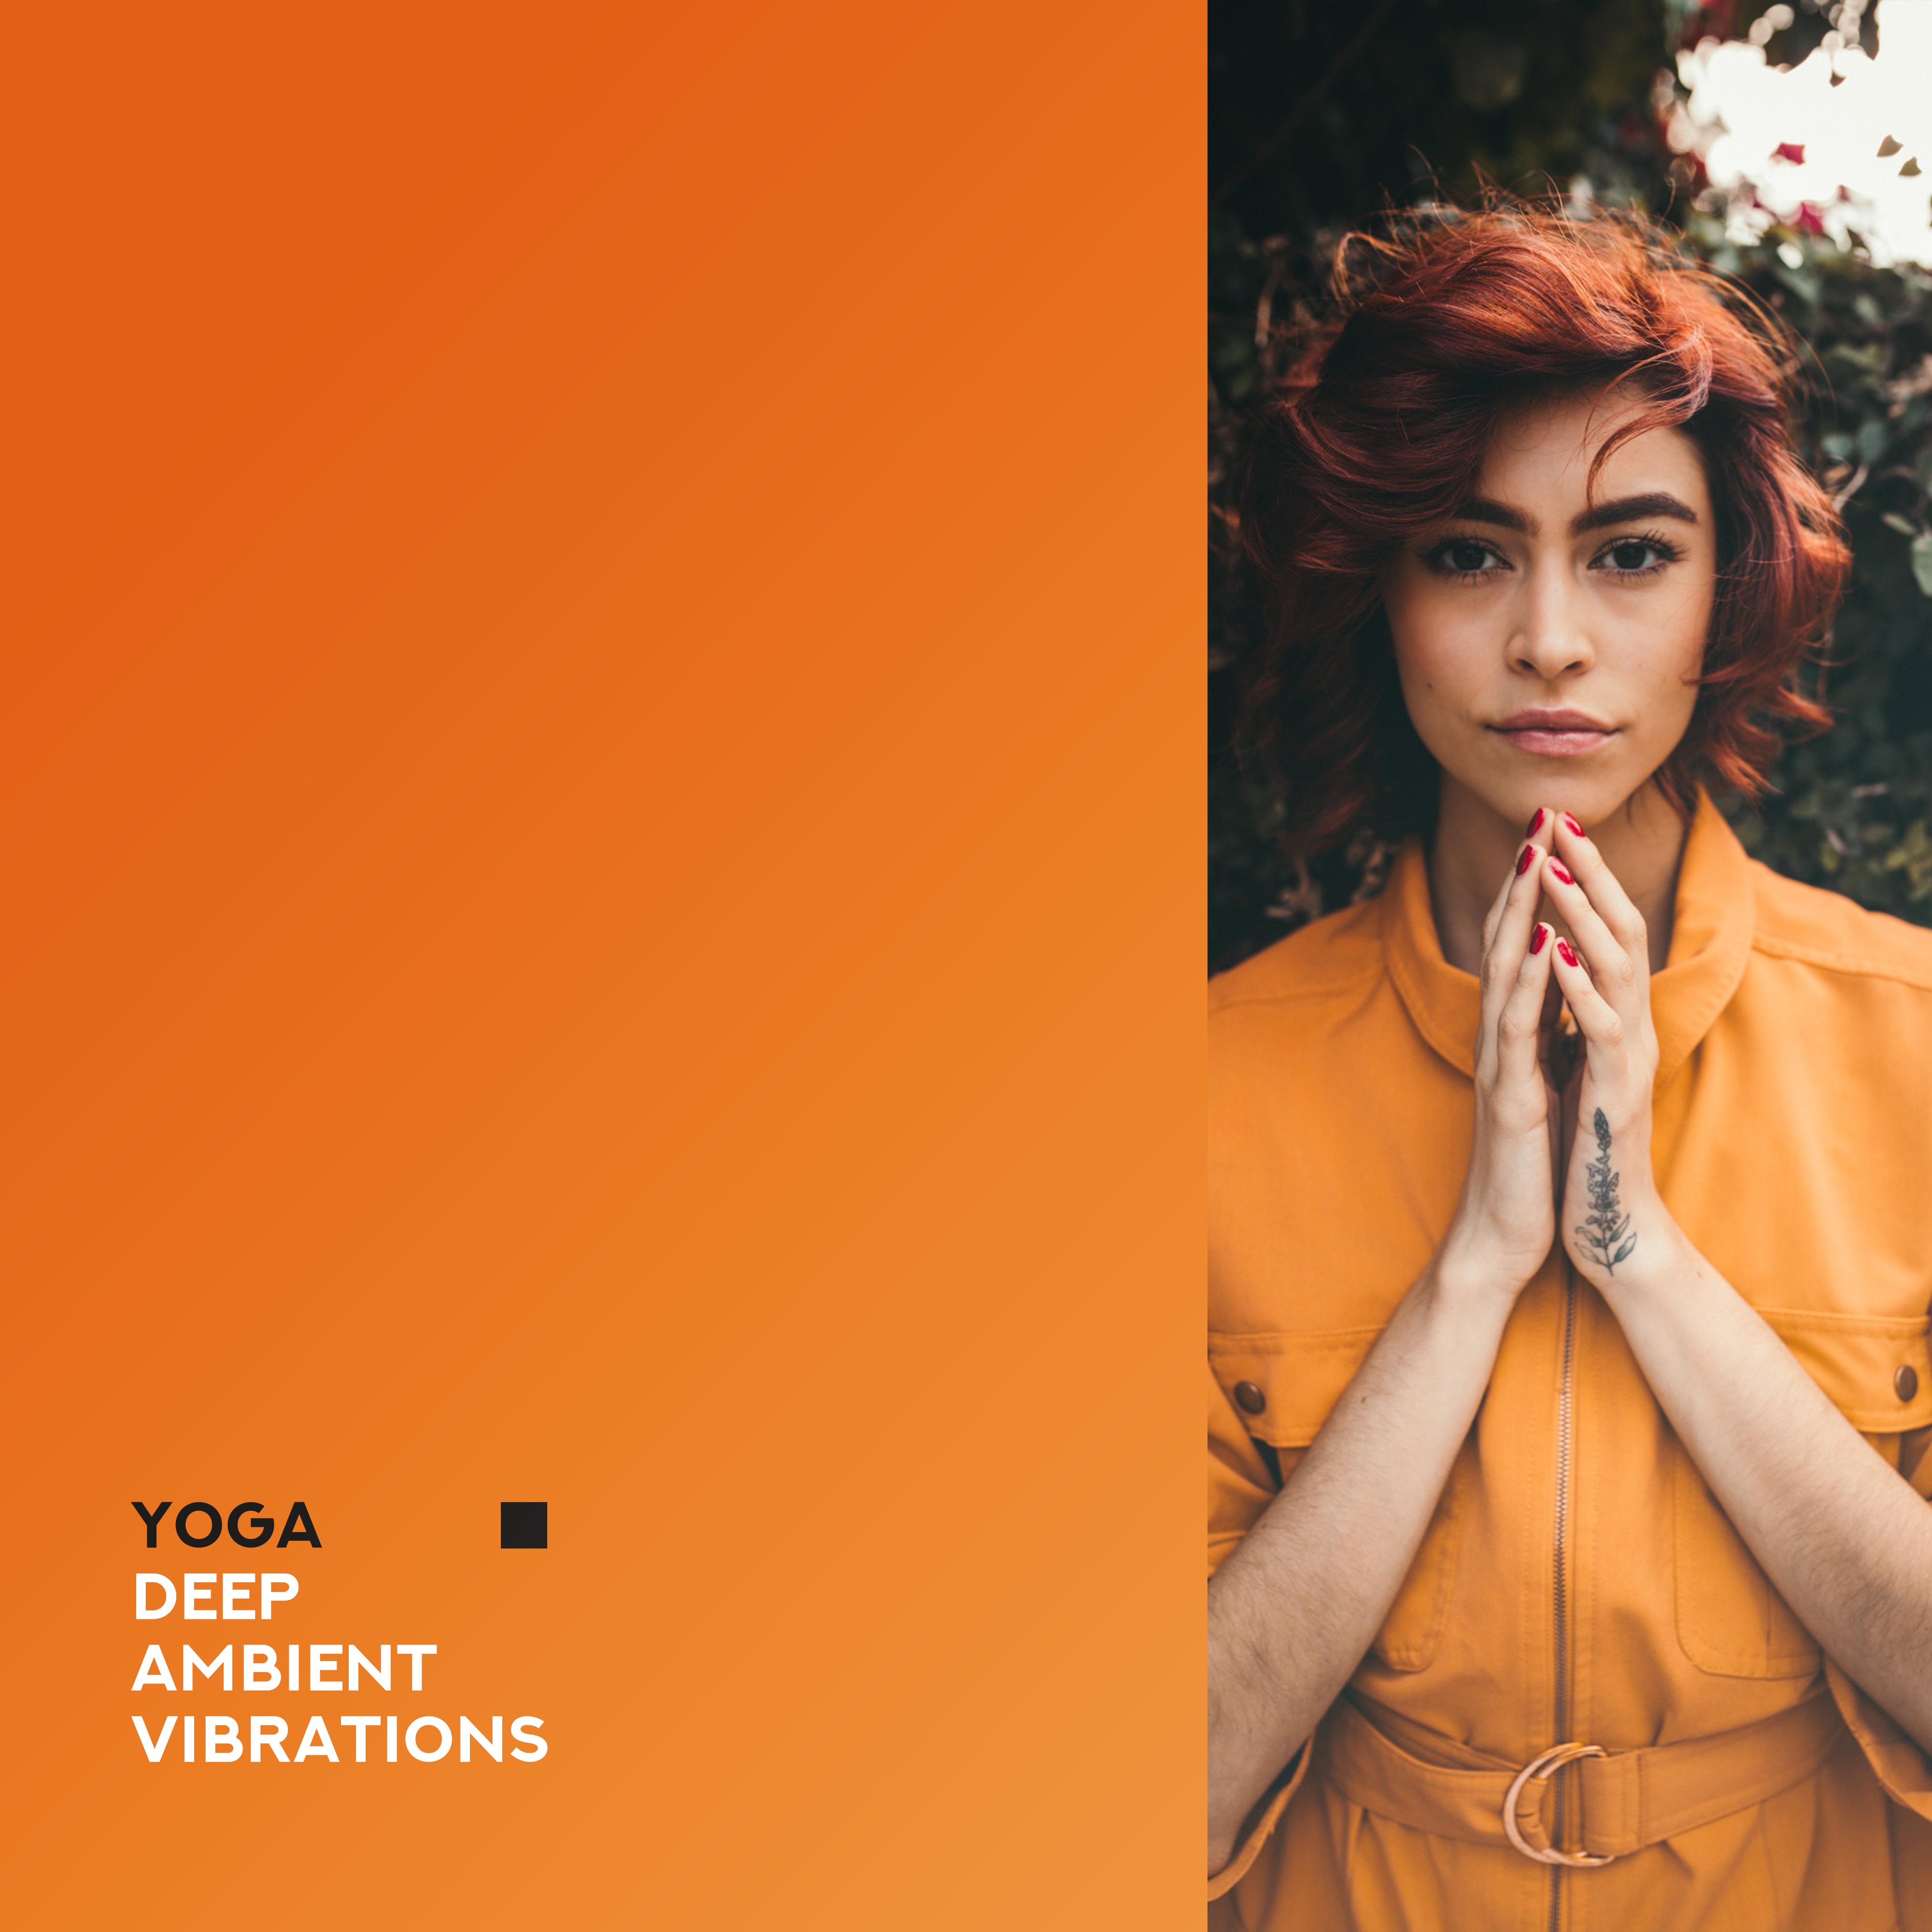 Yoga Deep Ambient Vibrations: 2019 New Age Music for Pure Meditation & Relaxation, Inner Bliss & Harmony, Improve Connection Between Body & Soul, Healing Songs, Opening Chakras